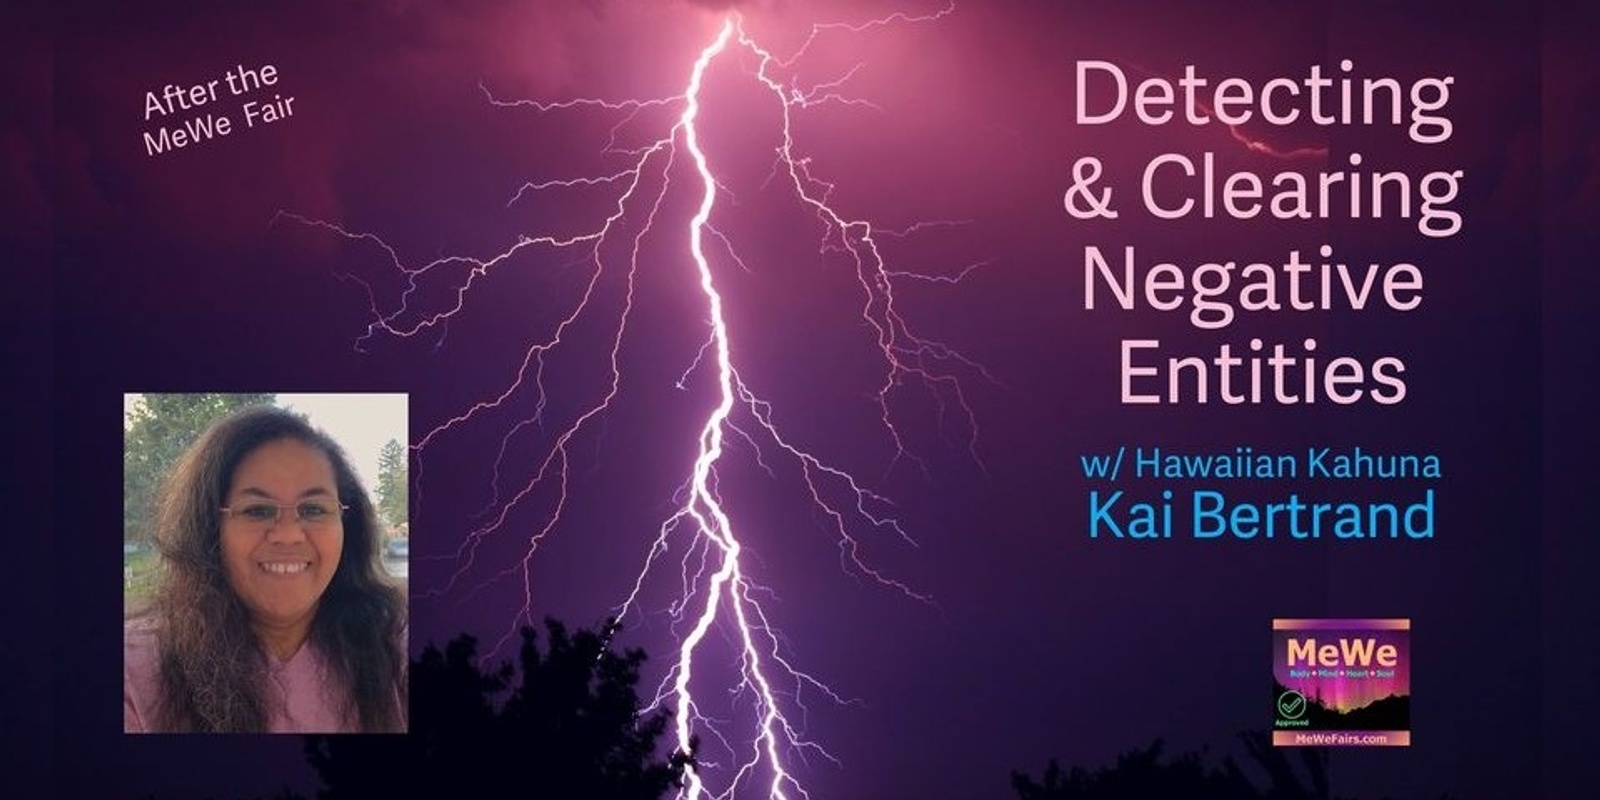 Banner image for Detecting & Clearing Negative Entities with Kai Bertrand (after the MeWe Fair in Lynnwood)